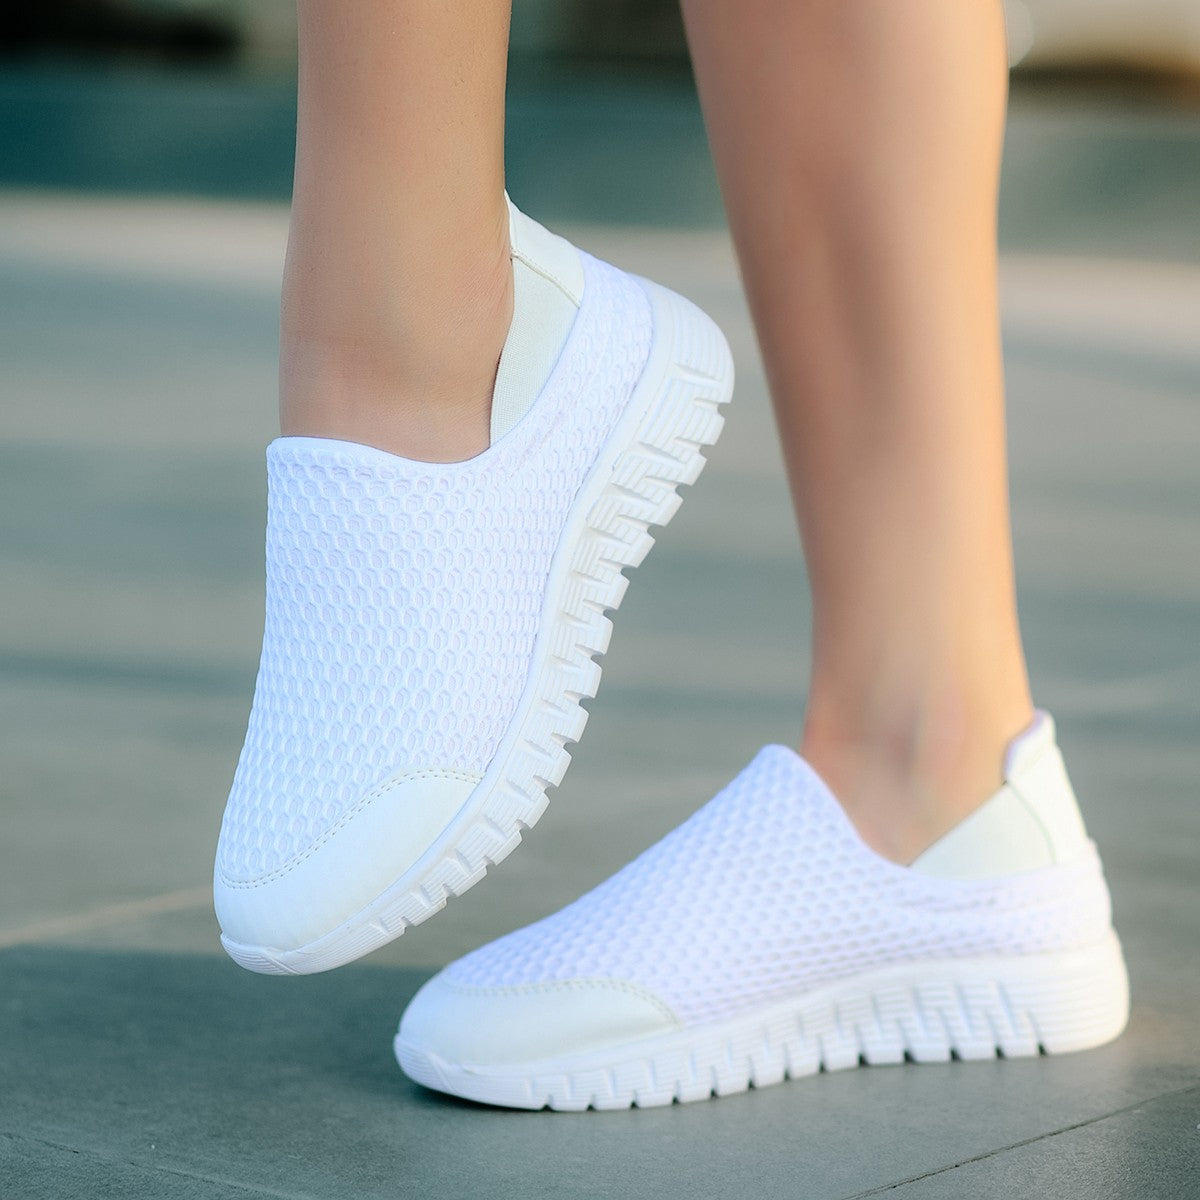 Women's White Stretch Ballet Sneaker Shoes - STREETMODE ™